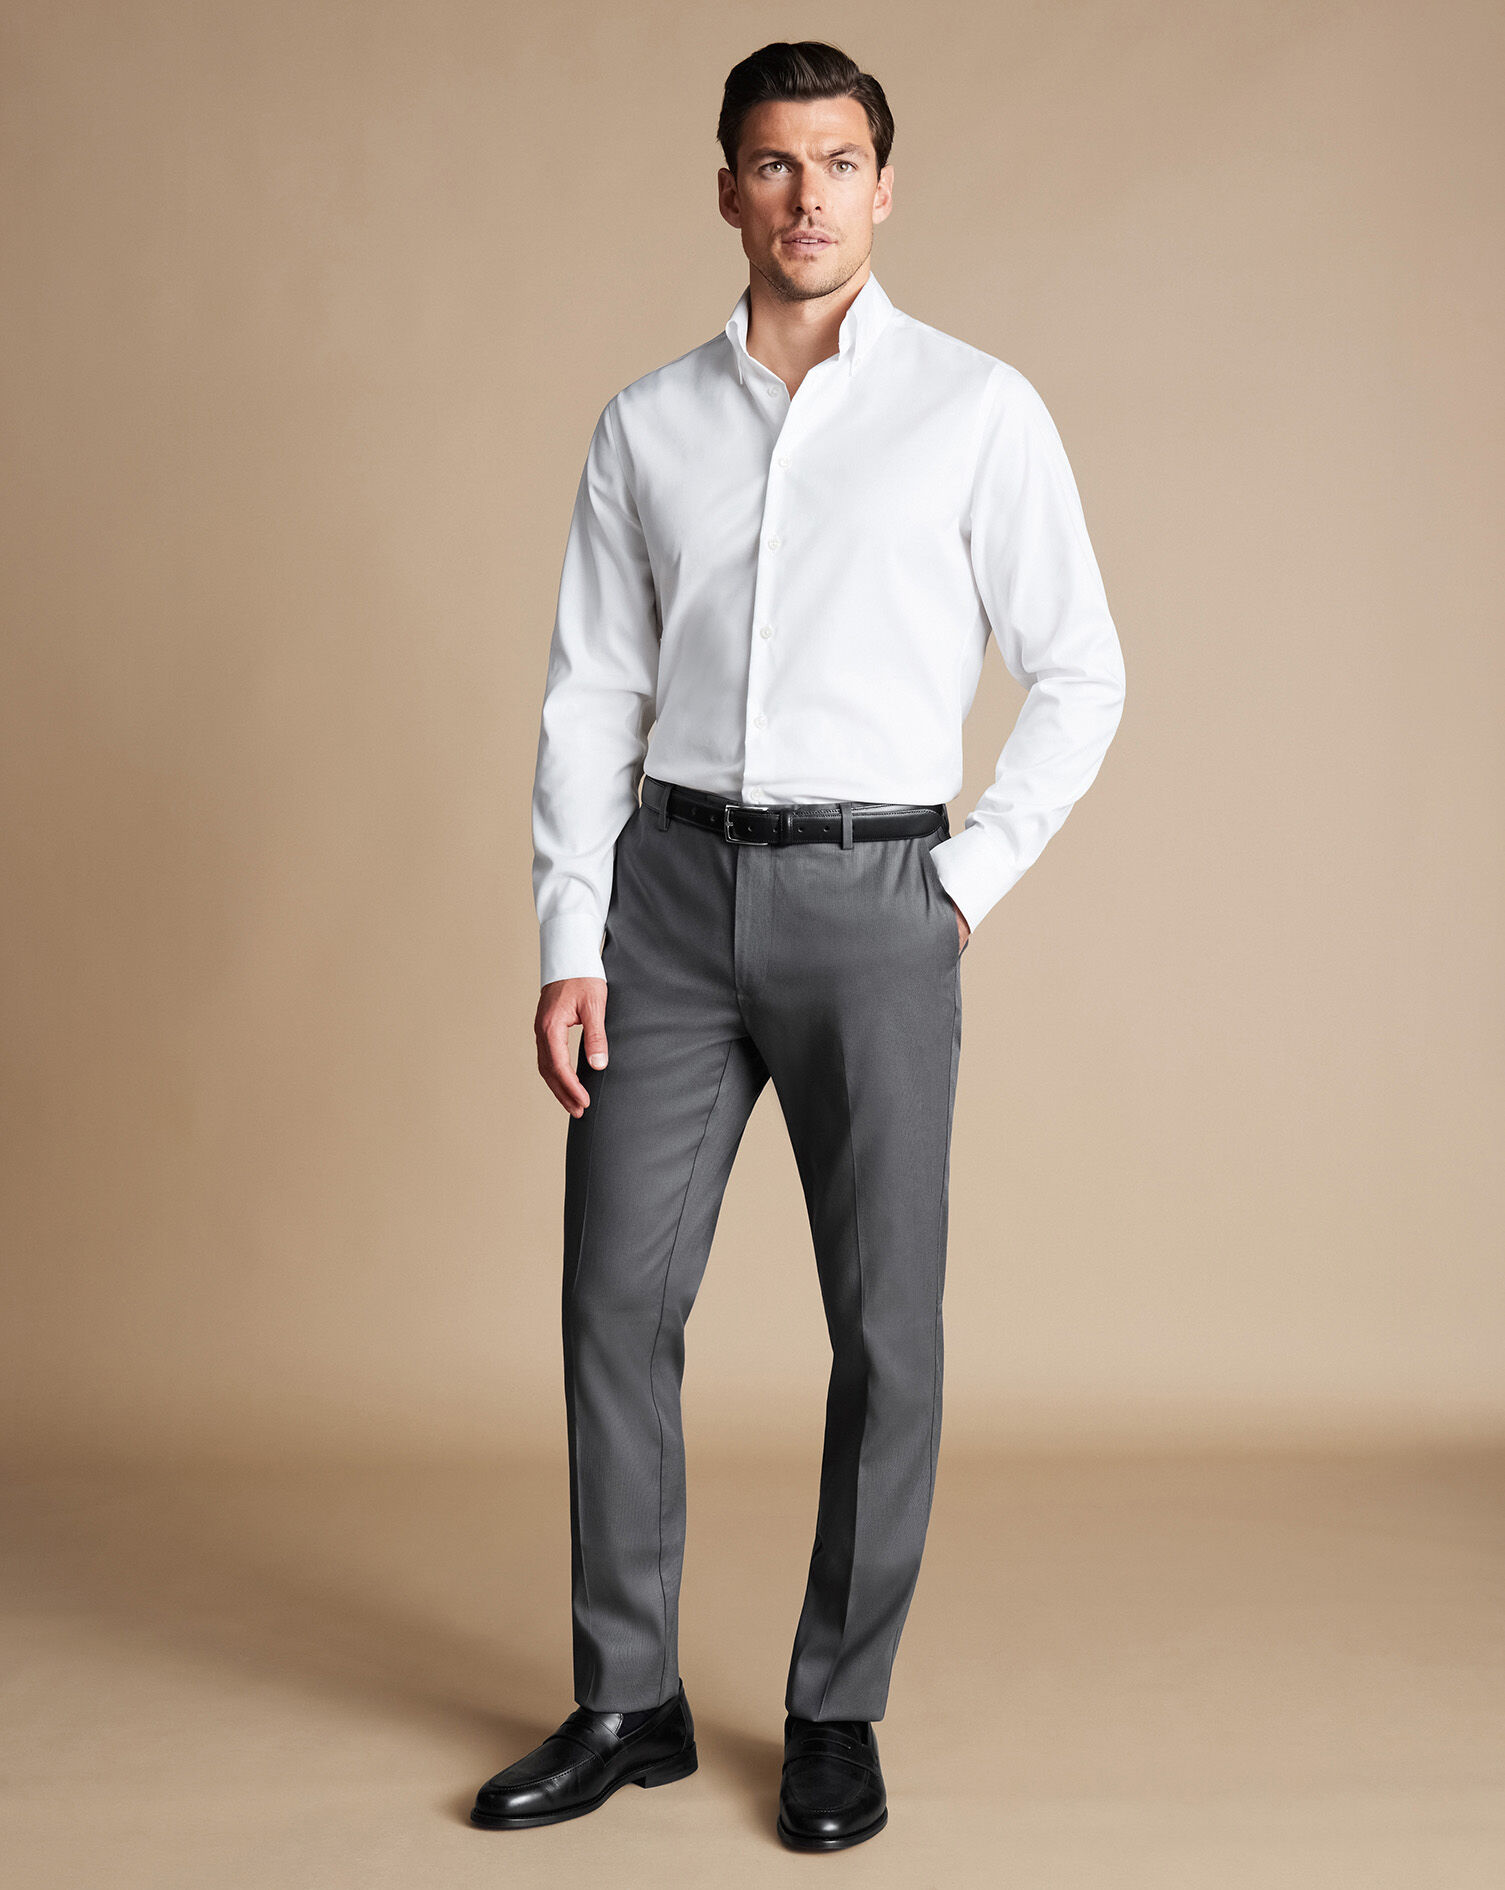 American-elm Light Grey Slim Fit Formal Trouser For Men, Cotton Formal  Pants For Office Wear at Rs 499.00 | Noida| ID: 2850304862262